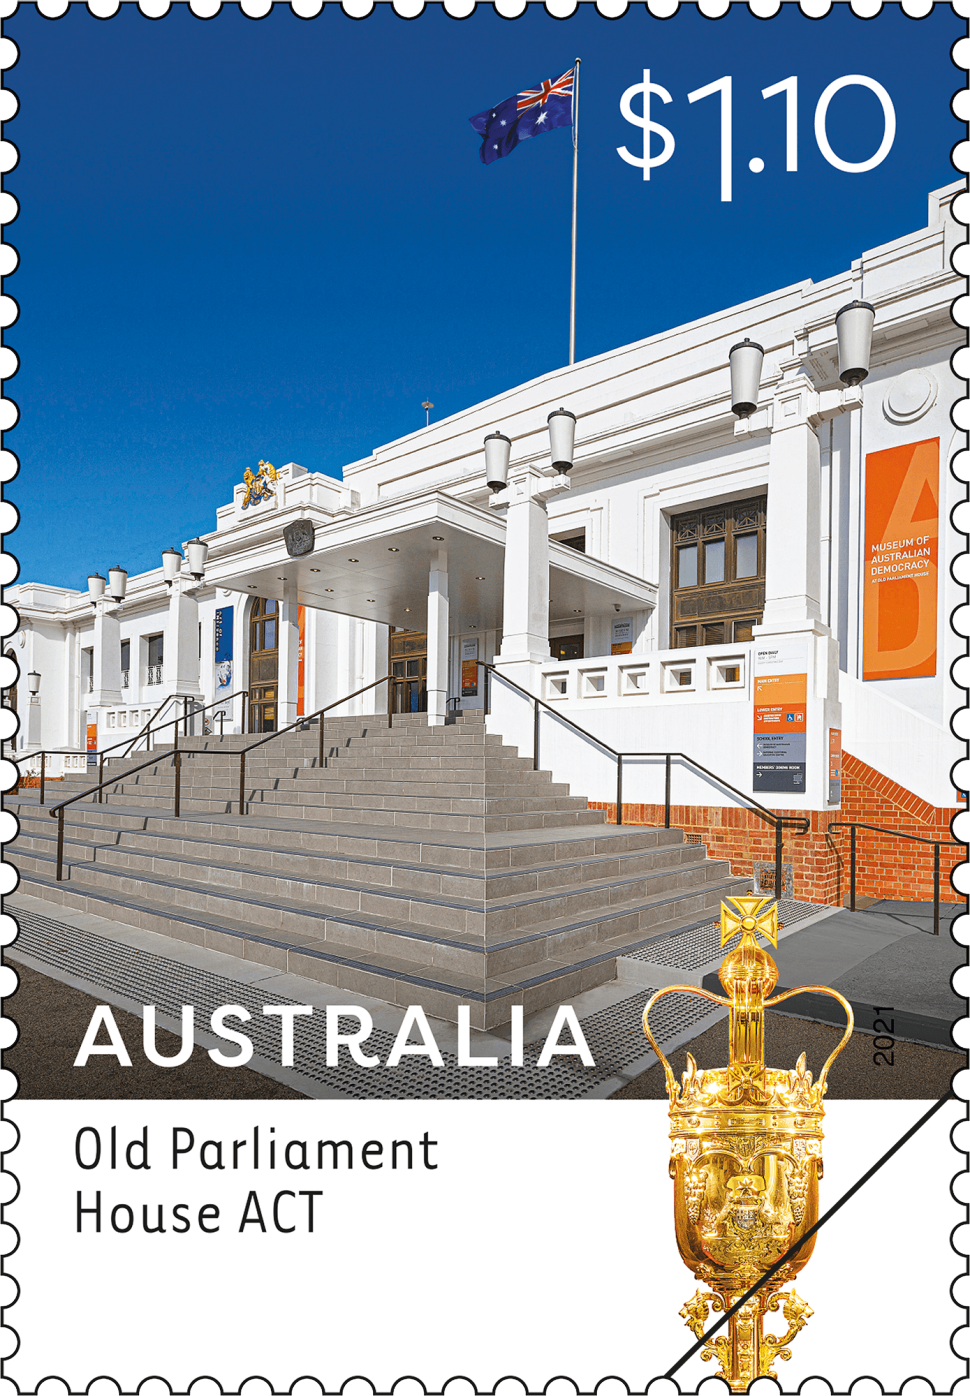 $1.10 Old Parliament House, Canberra